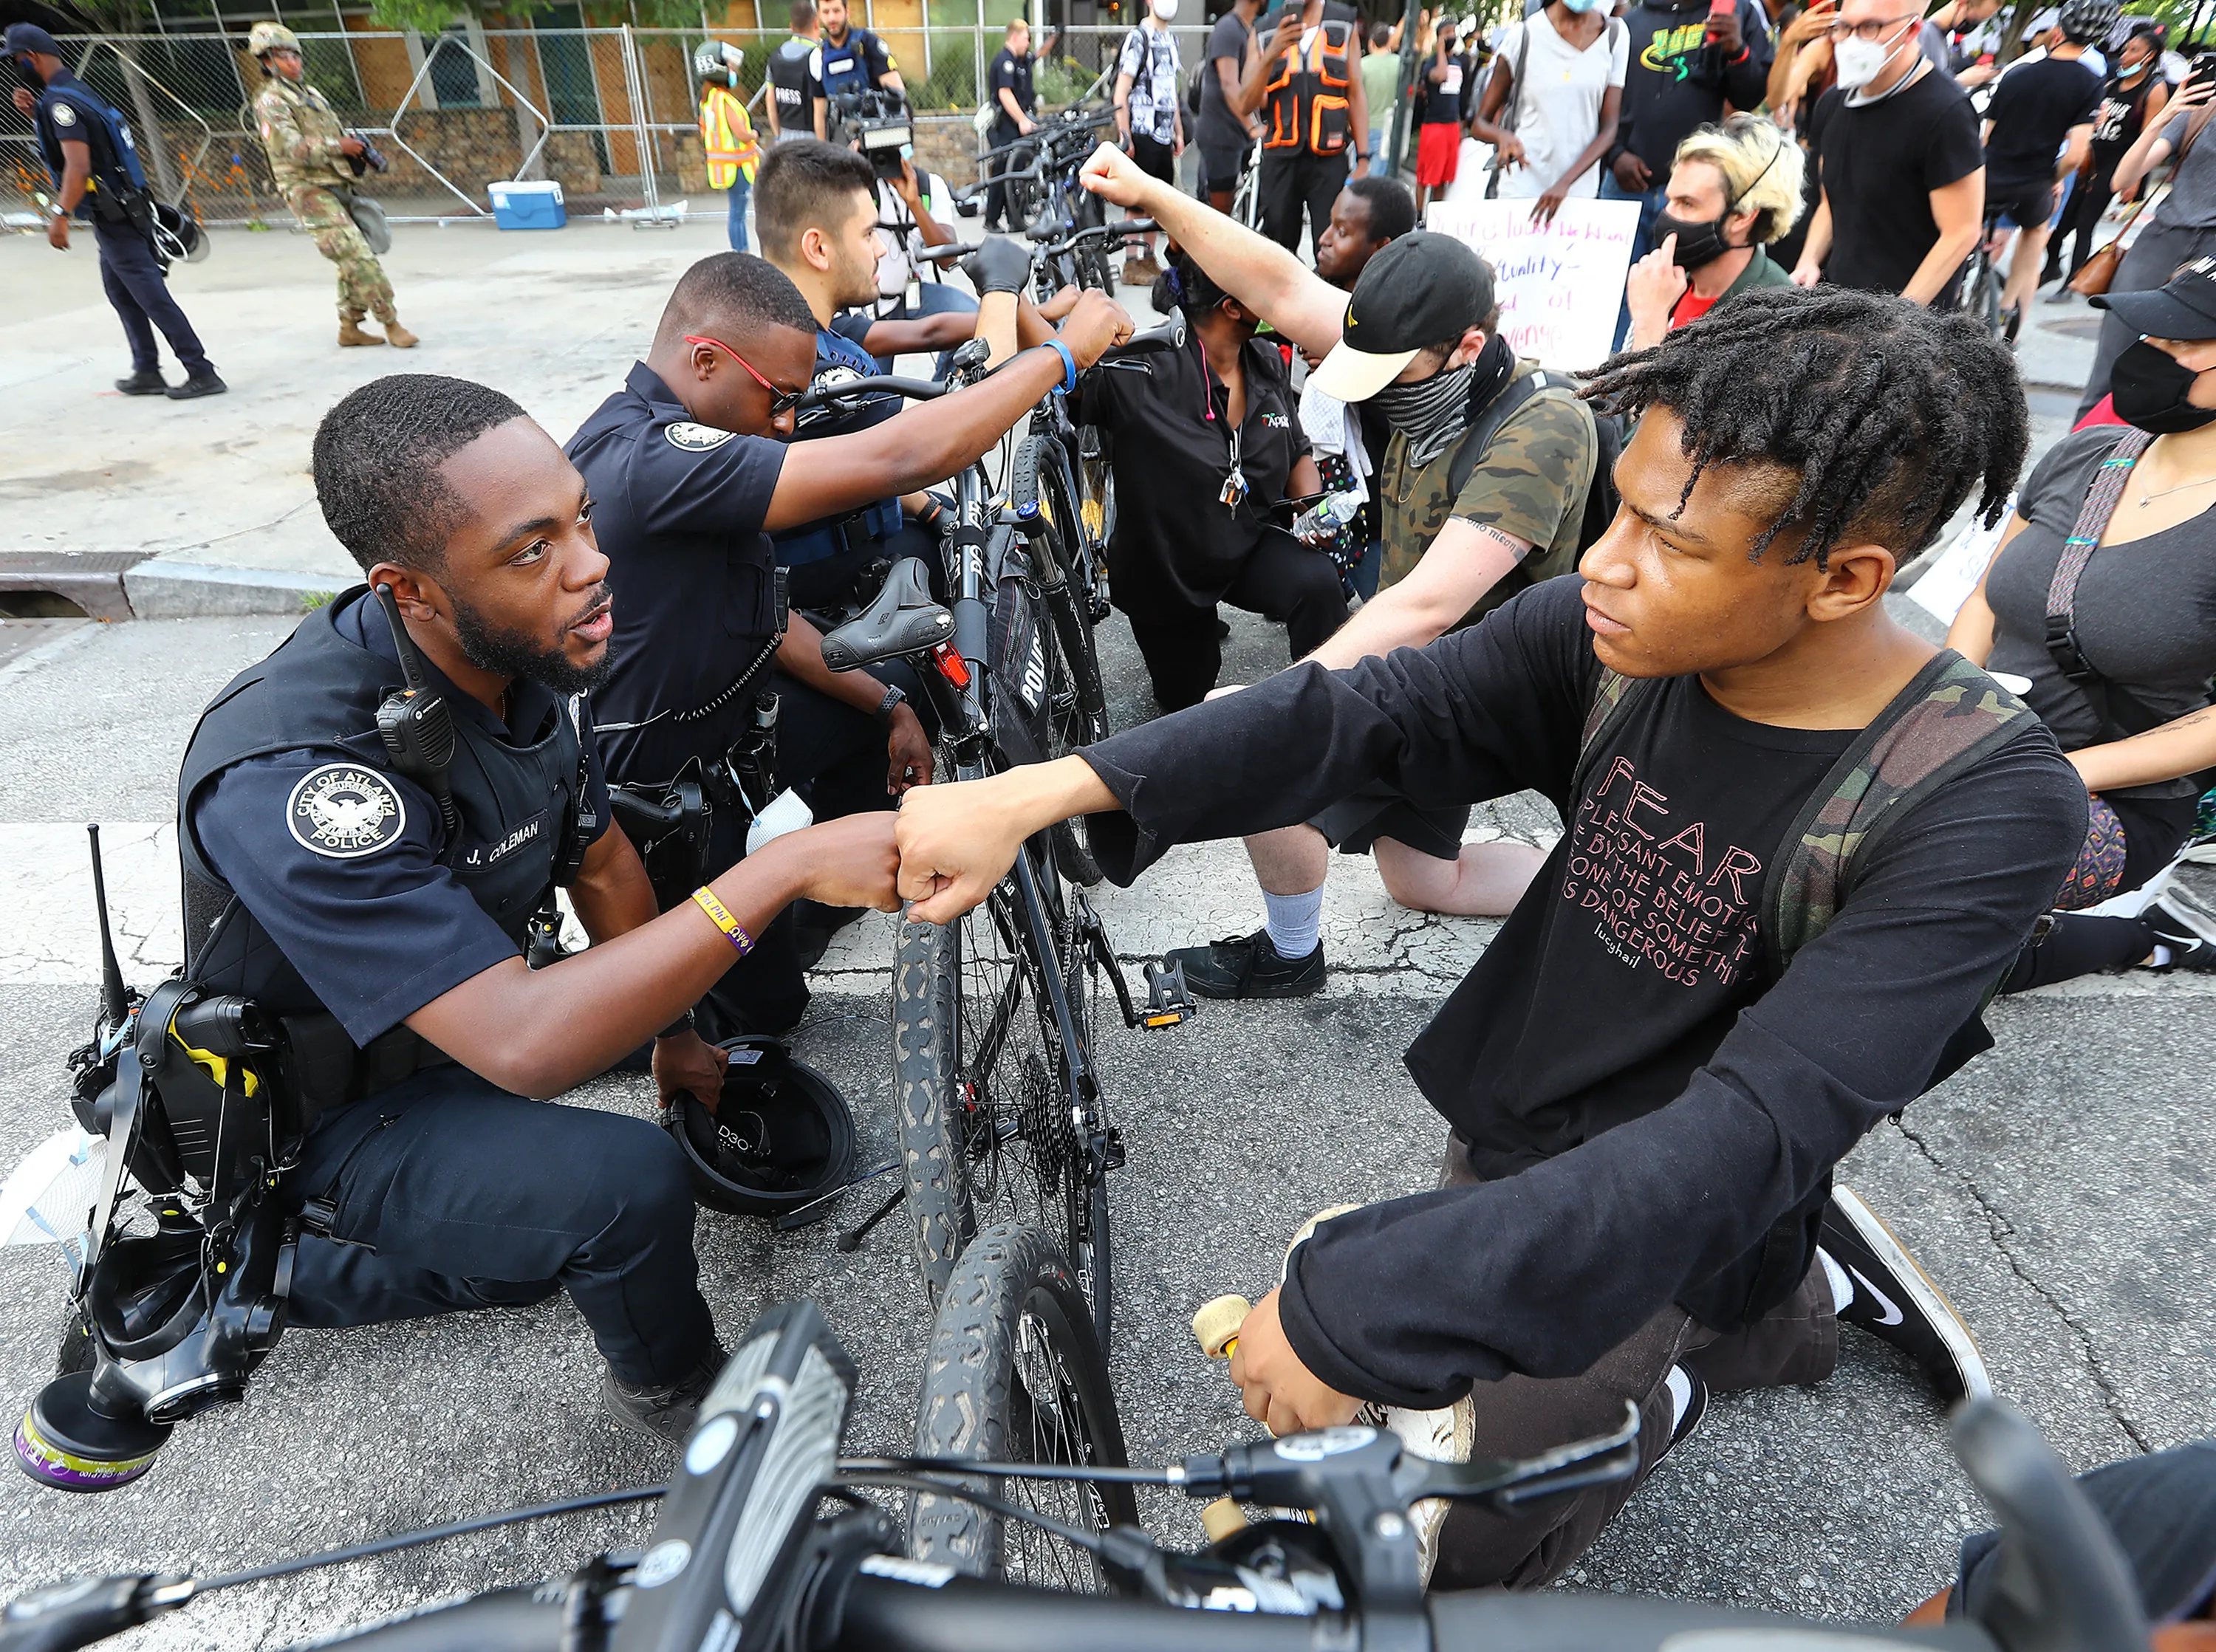 7 myths about "defunding the police" debunked | Brookings